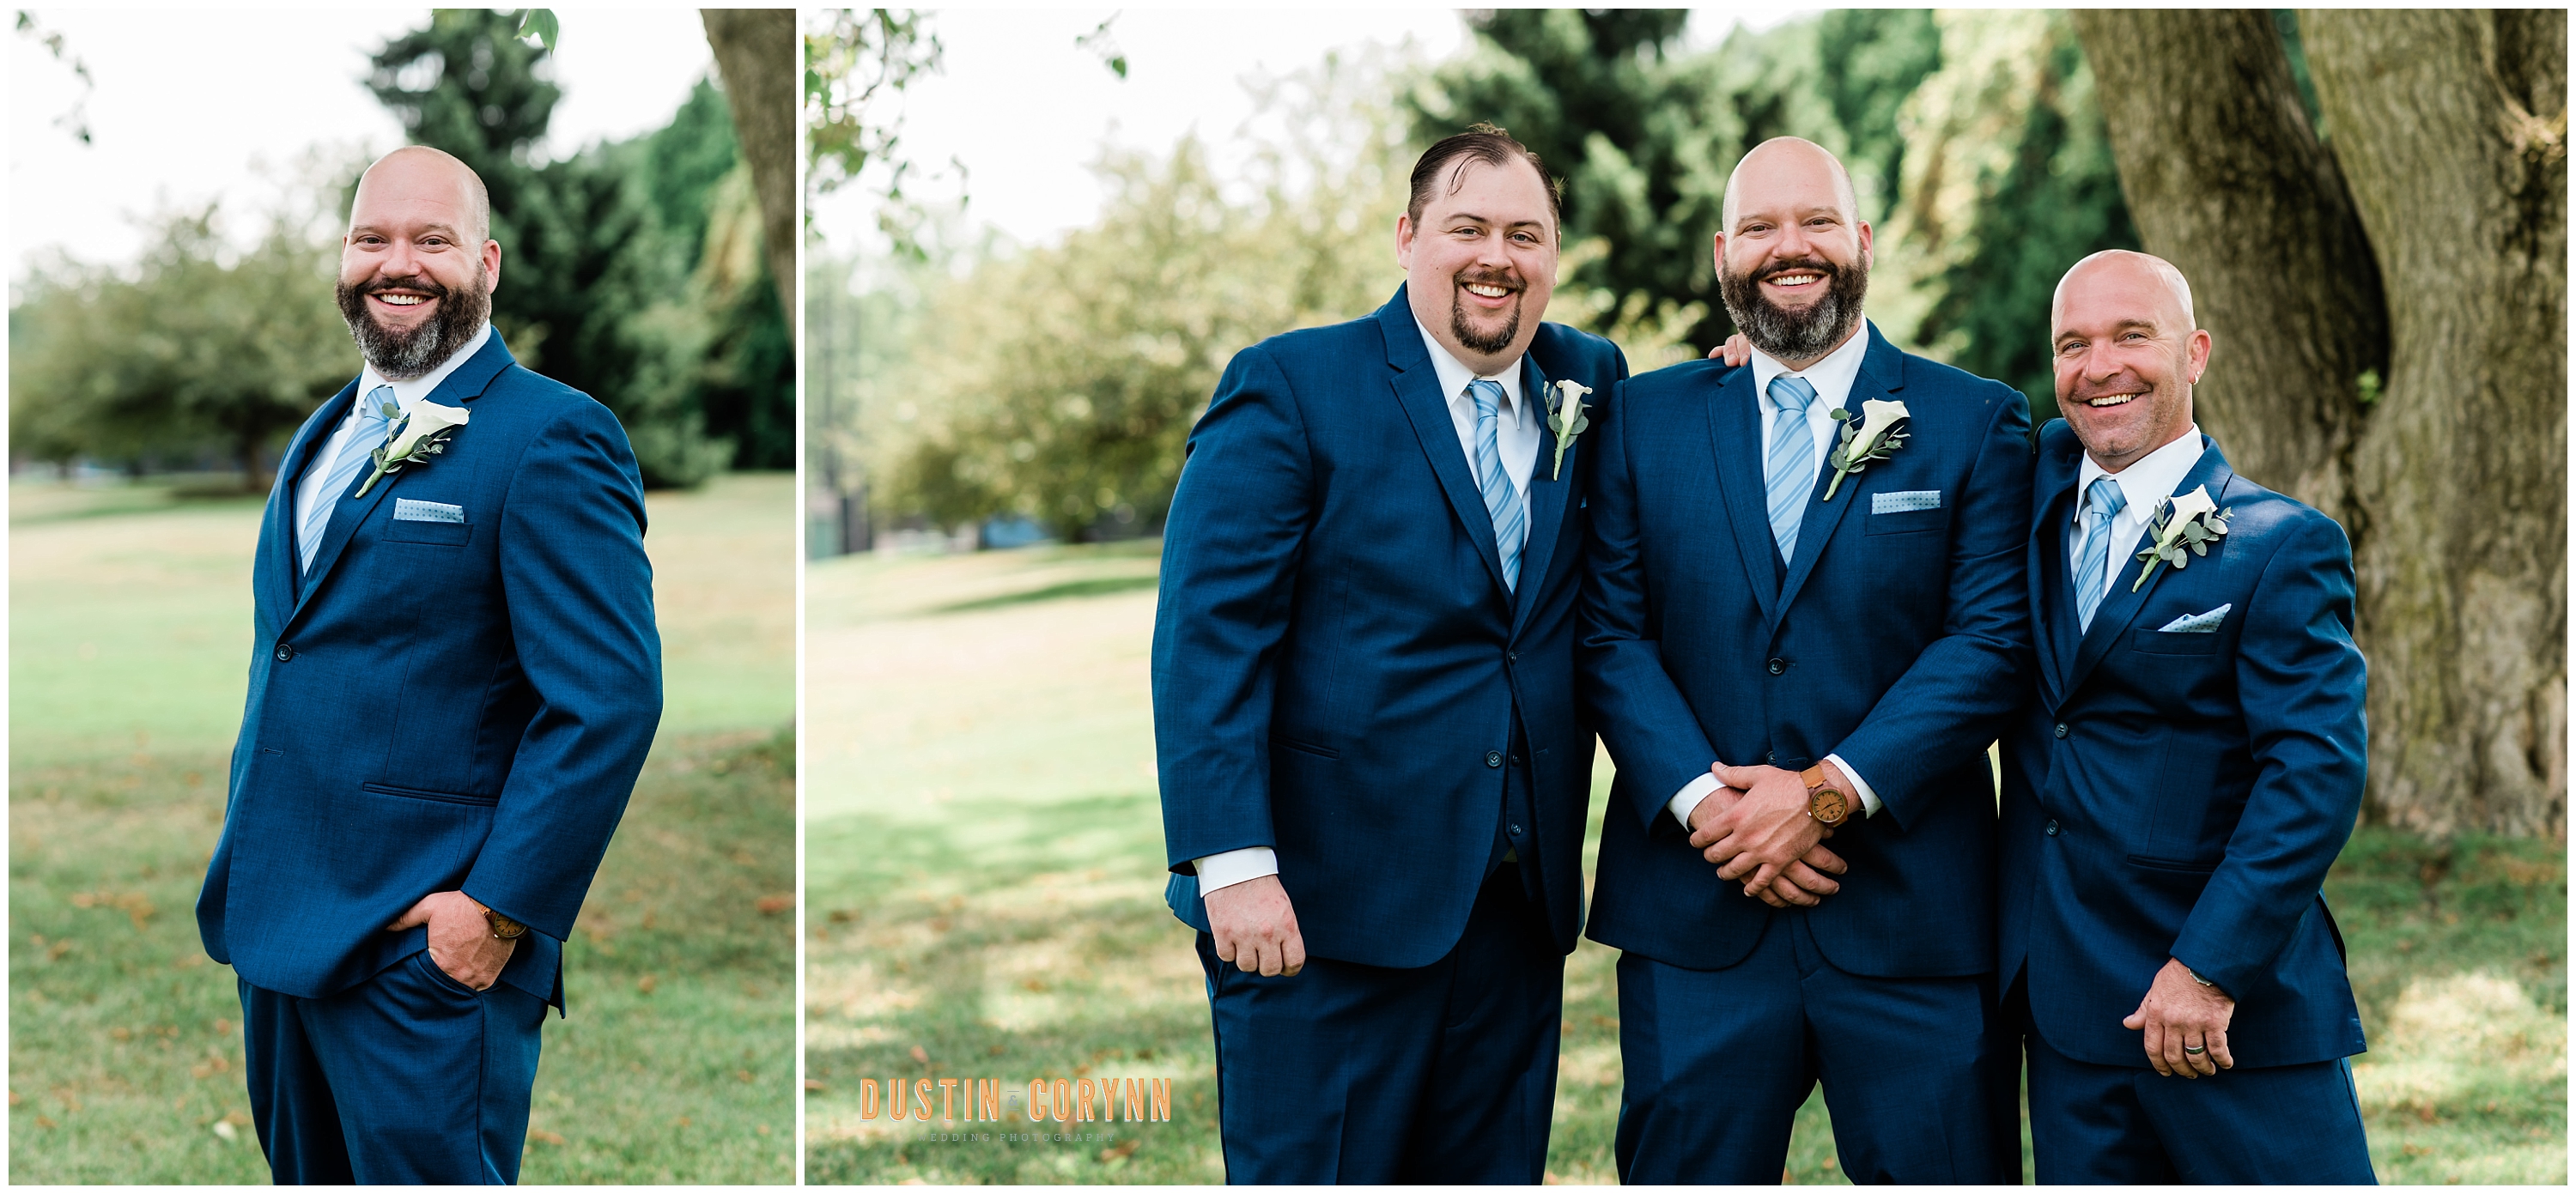 Groom and Groomsmen at Pine Valley Country Club Wedding